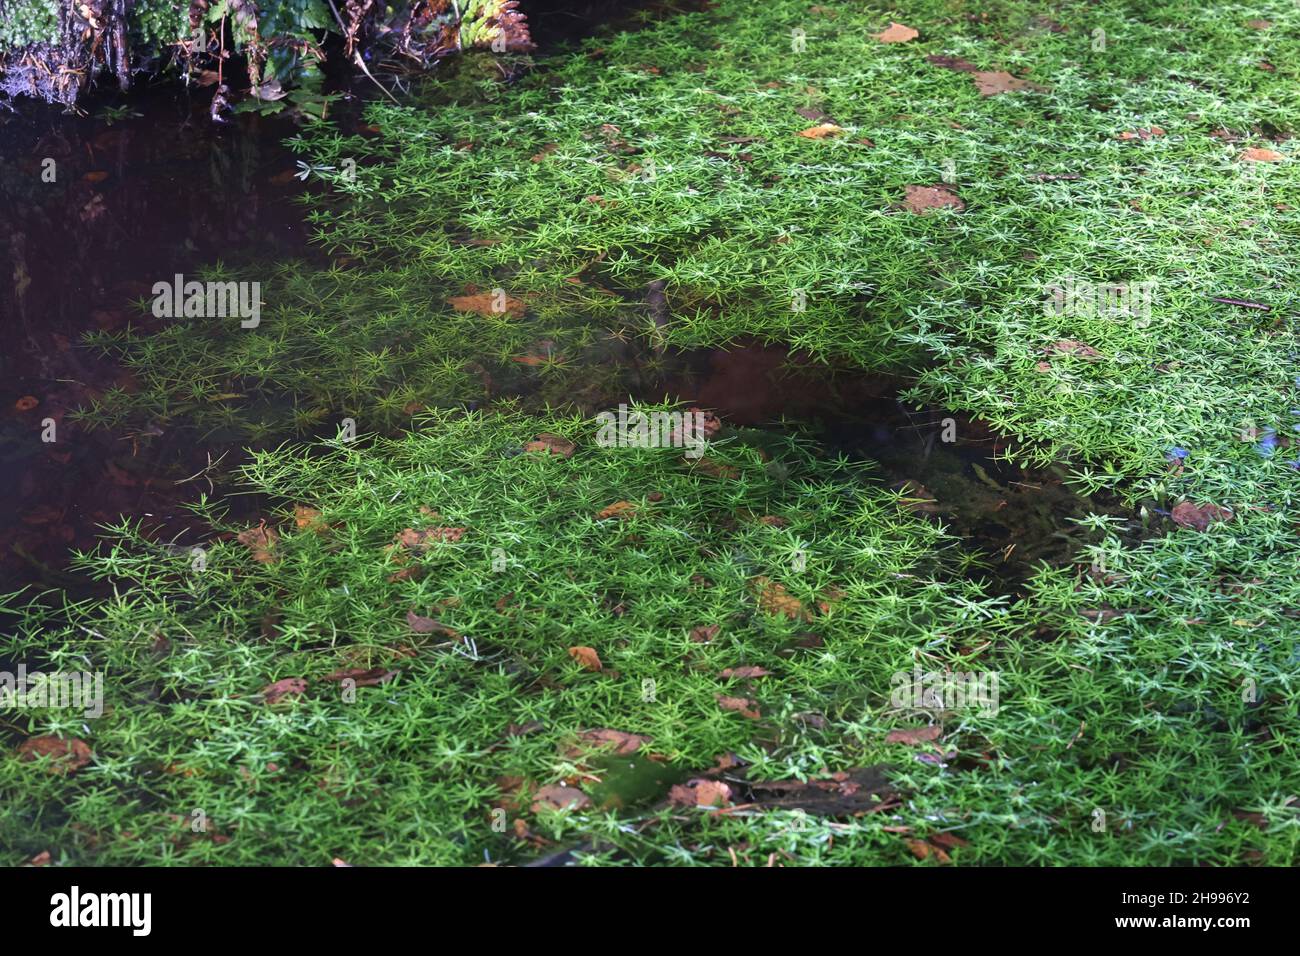 Callitriche cophocarpa, commonly known as water starwort, wild aquatic plant from Finland Stock Photo